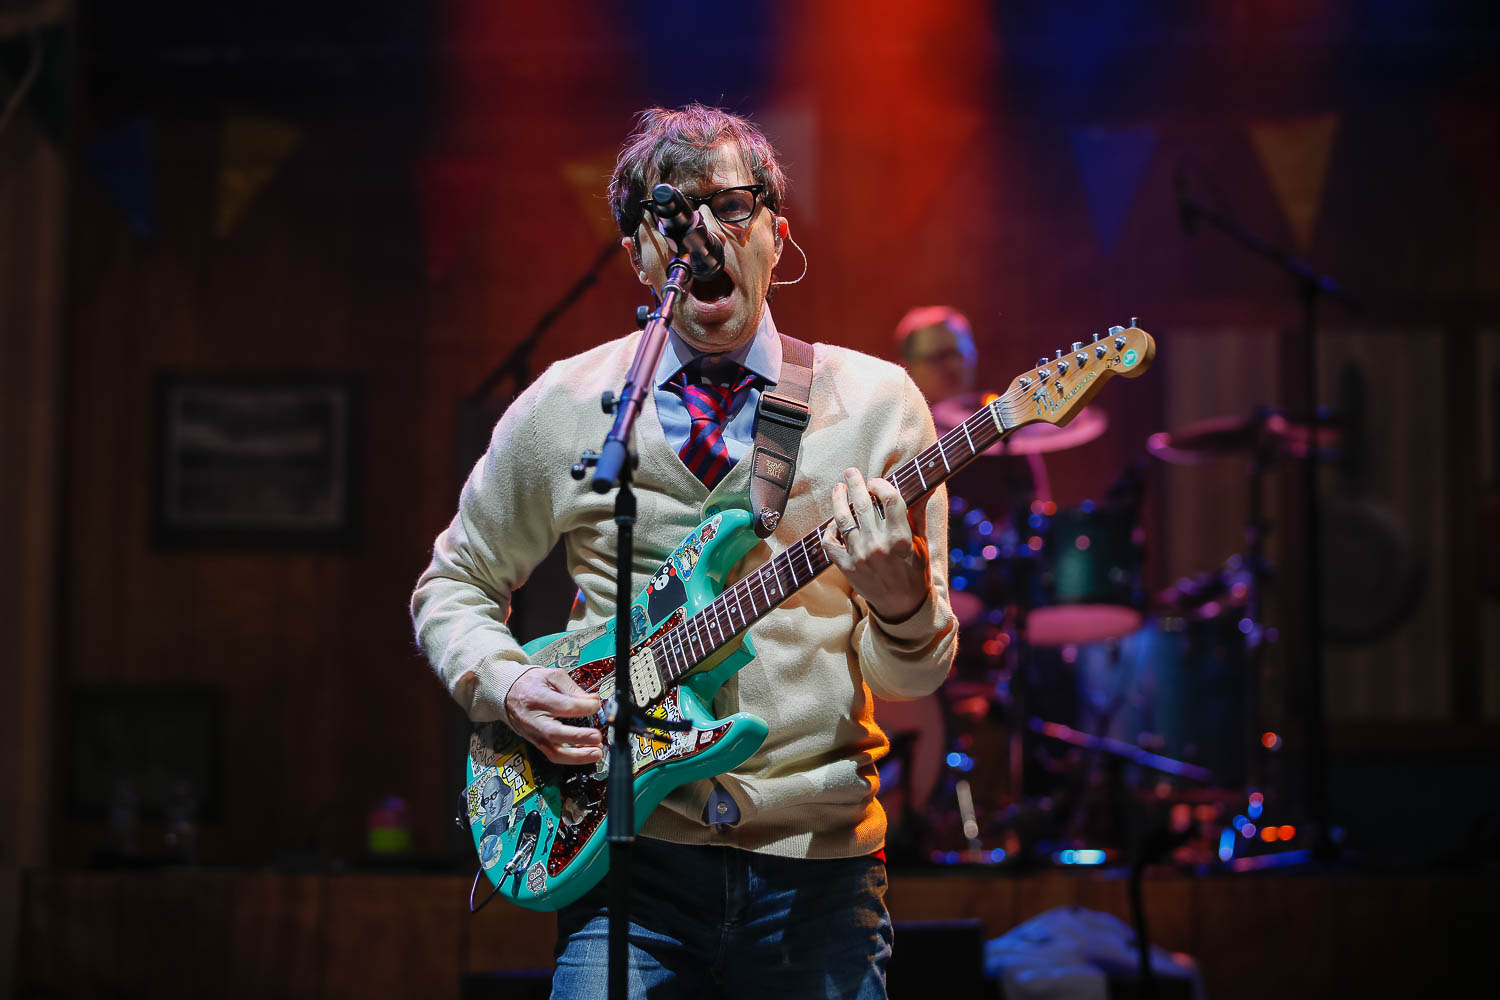 Weezer played at the Shoreline Amphitheater August 6, 2018